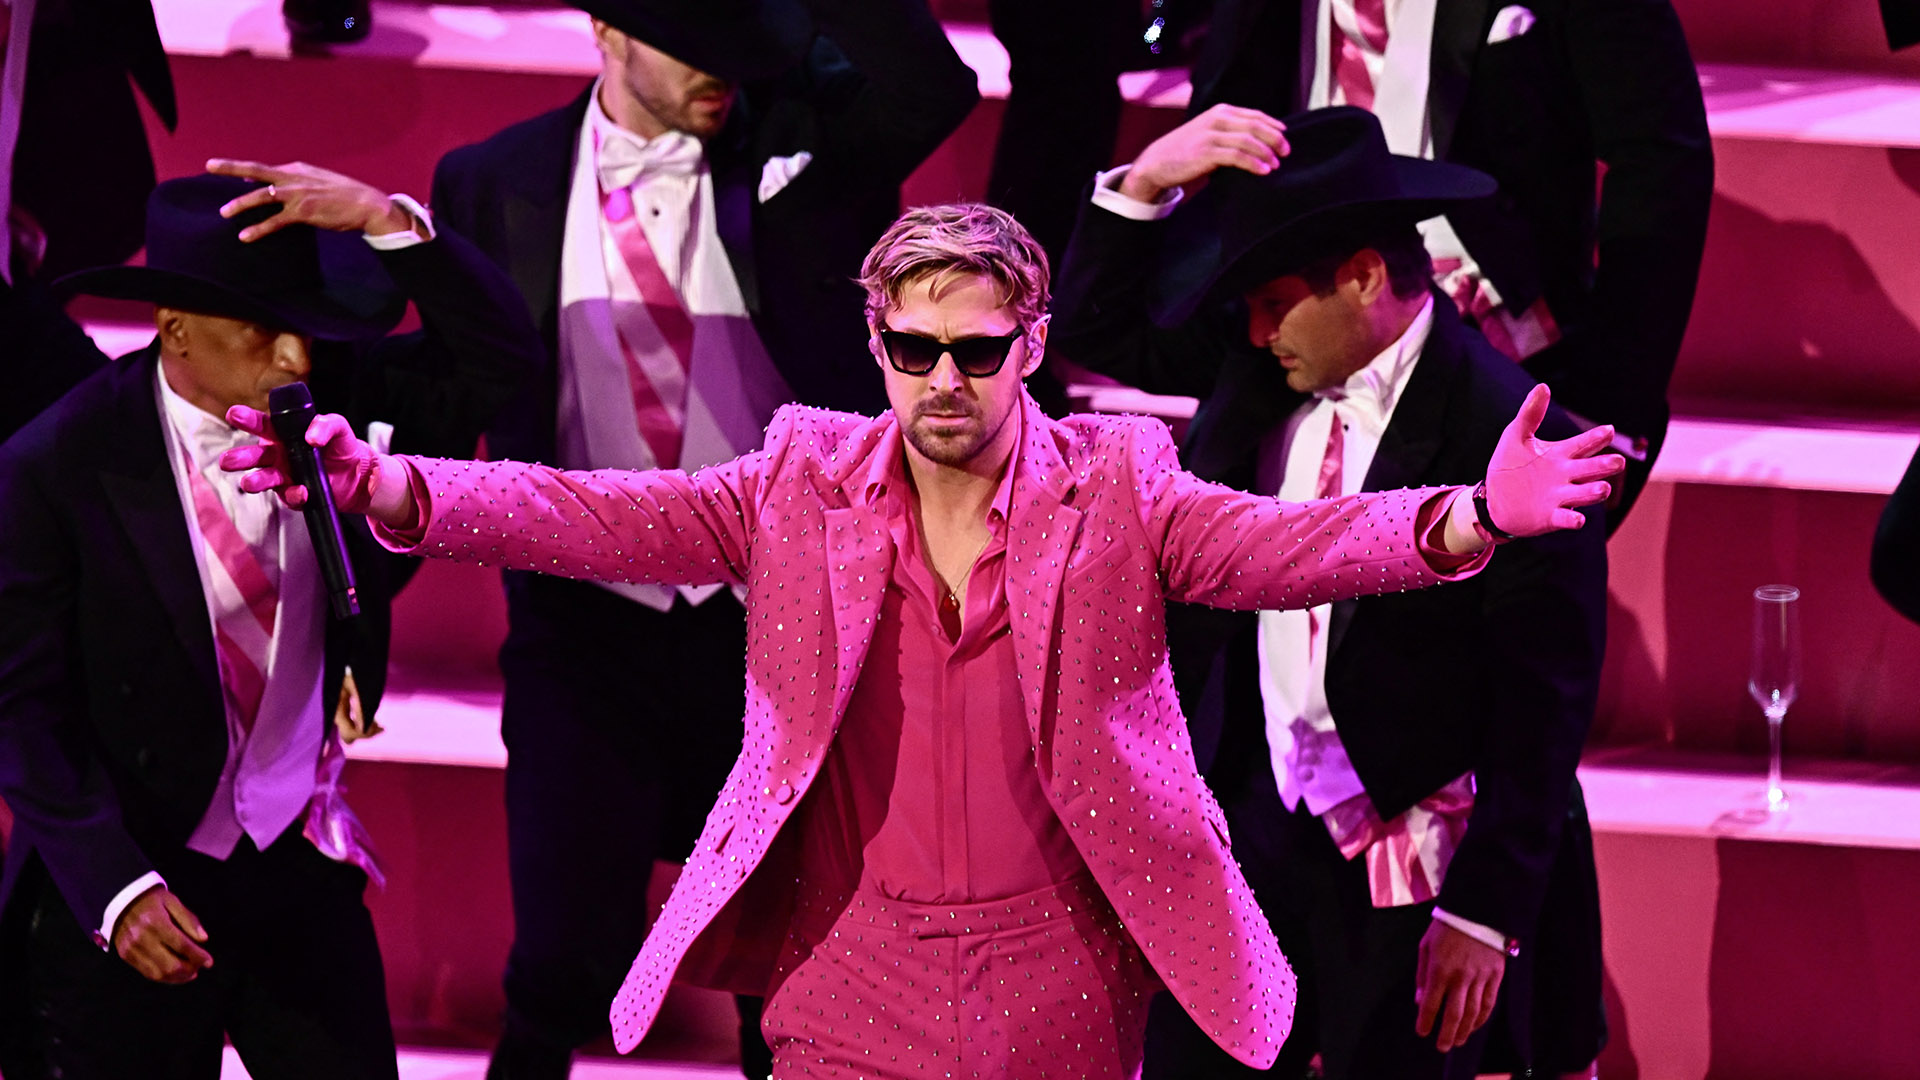 Ryan Gosling Oscars performance: The Ultimate Showstopper with A-list Cameos!